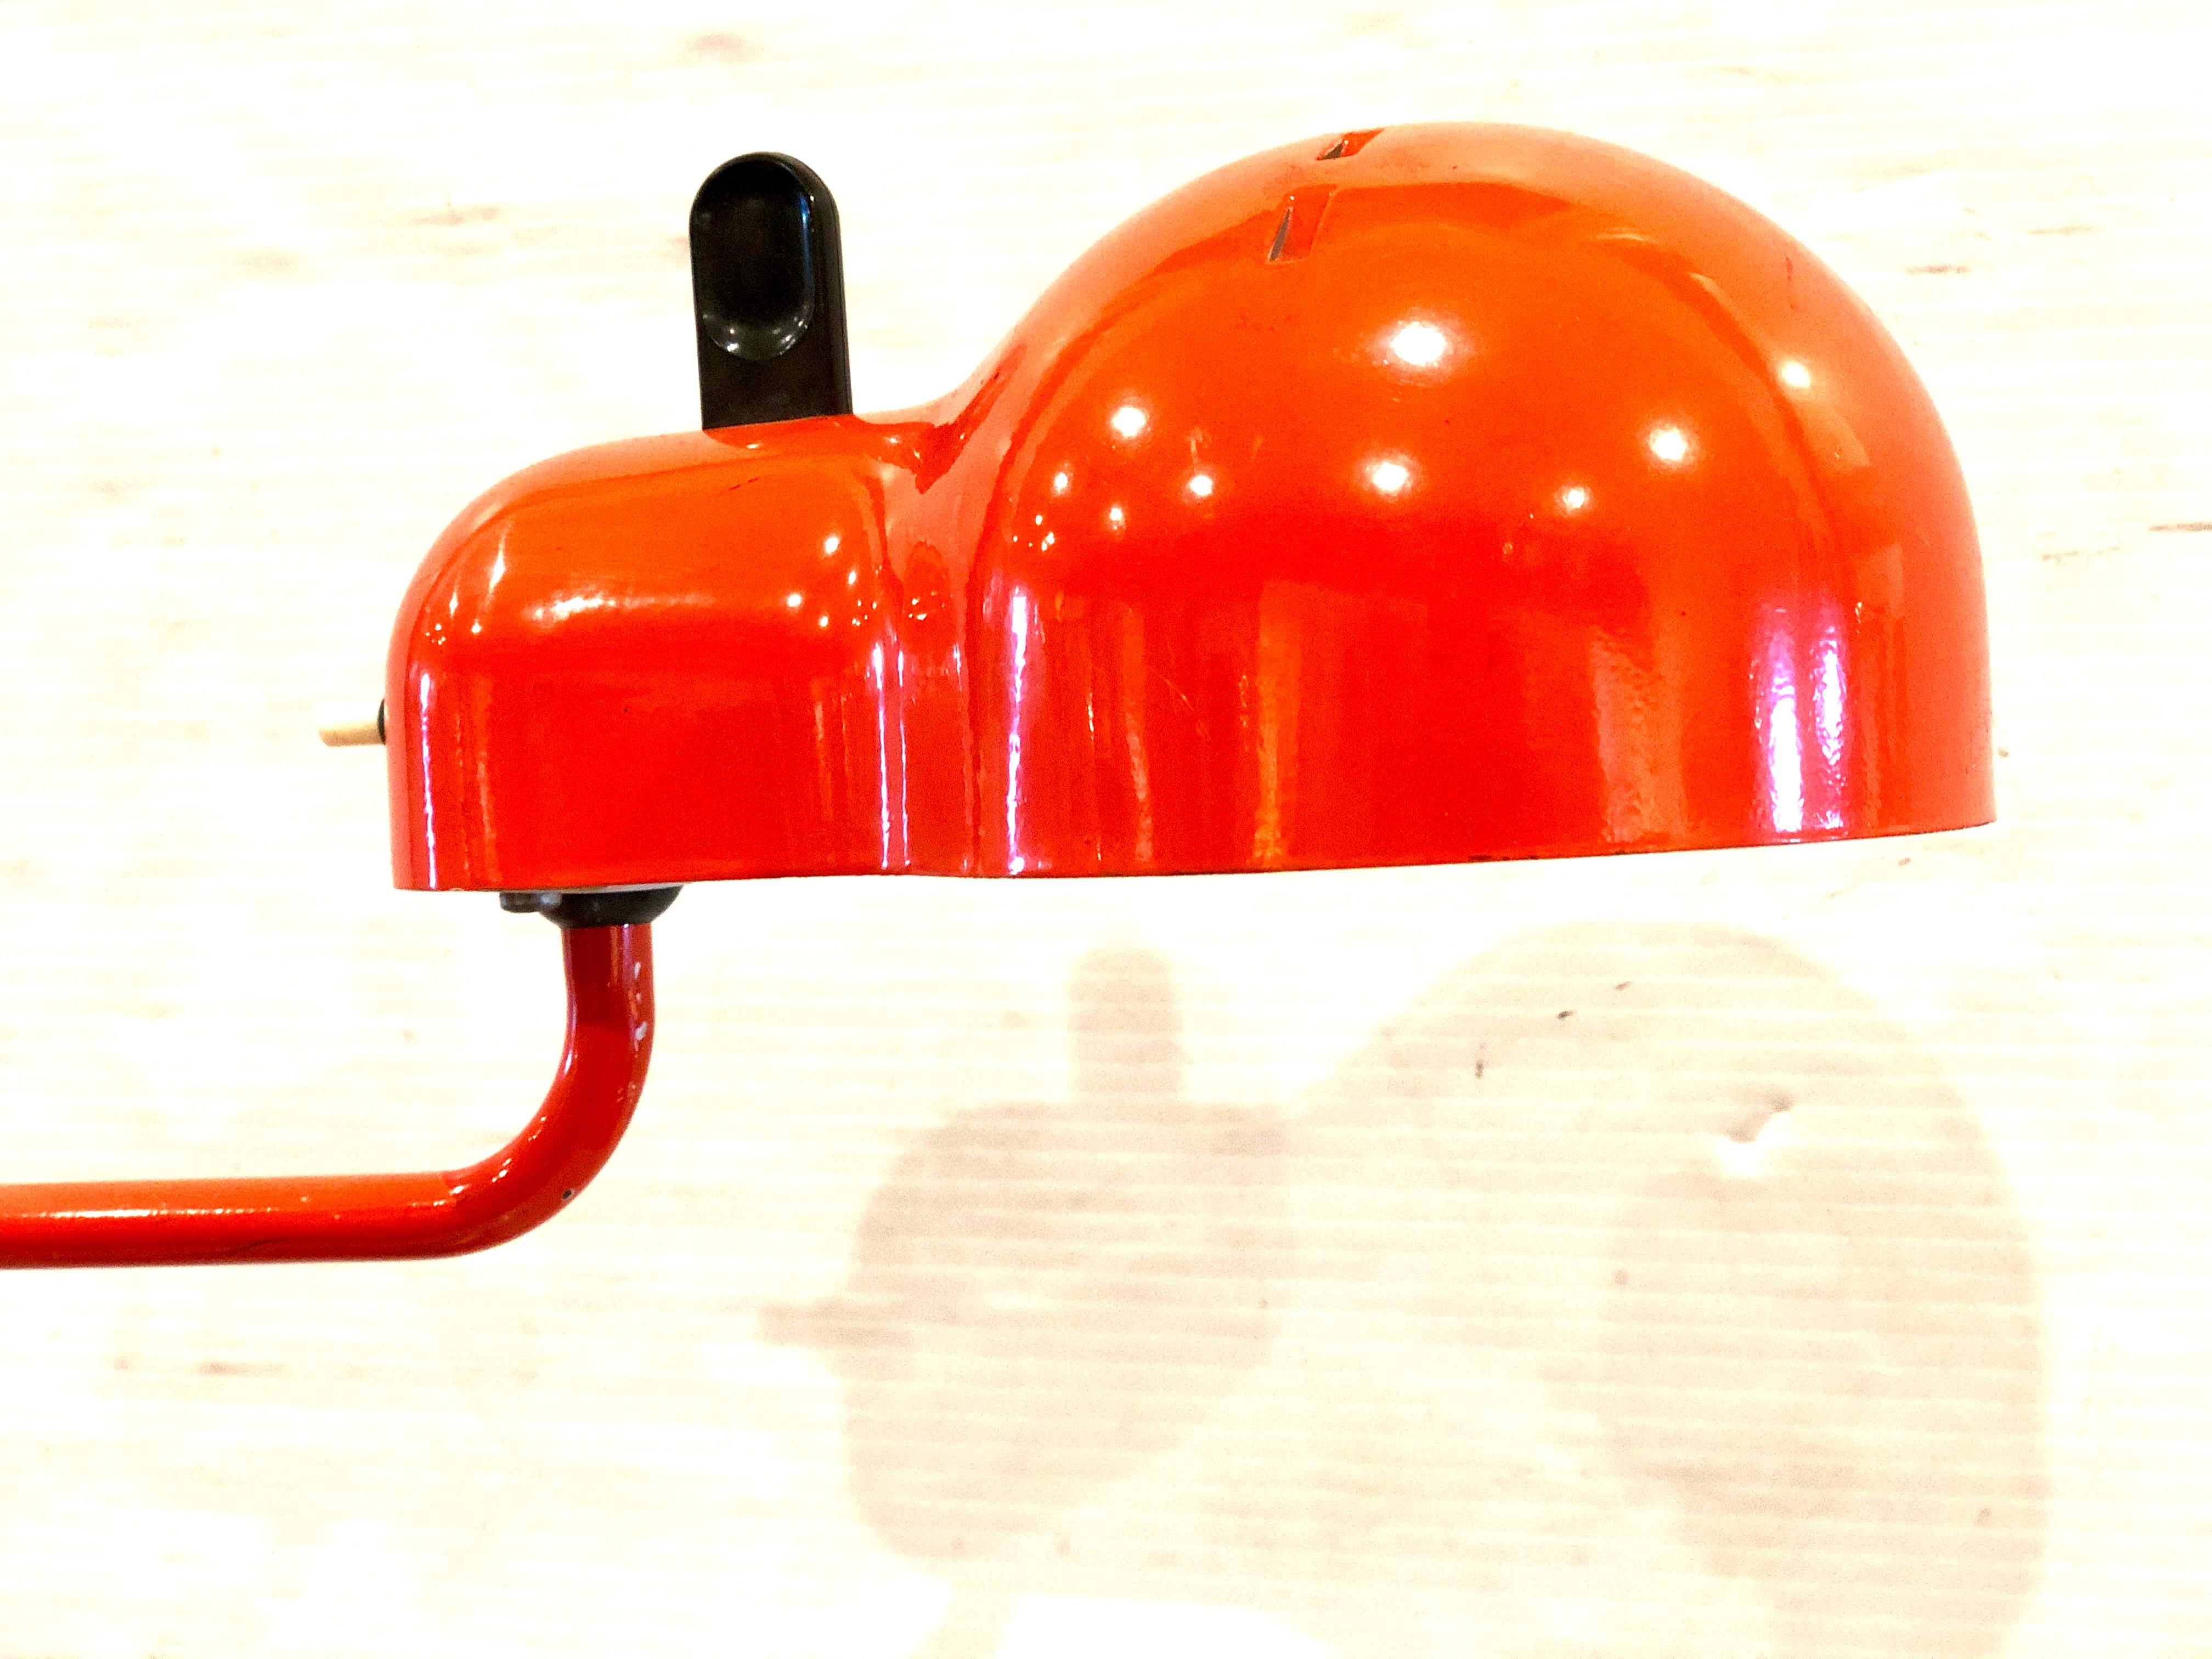 Joe Colombo 'Topo' task light for Stilnovo, circa 1970s. Executed in orange enameled metal and plastic with black plastic details. Manufacturer's stamp: 